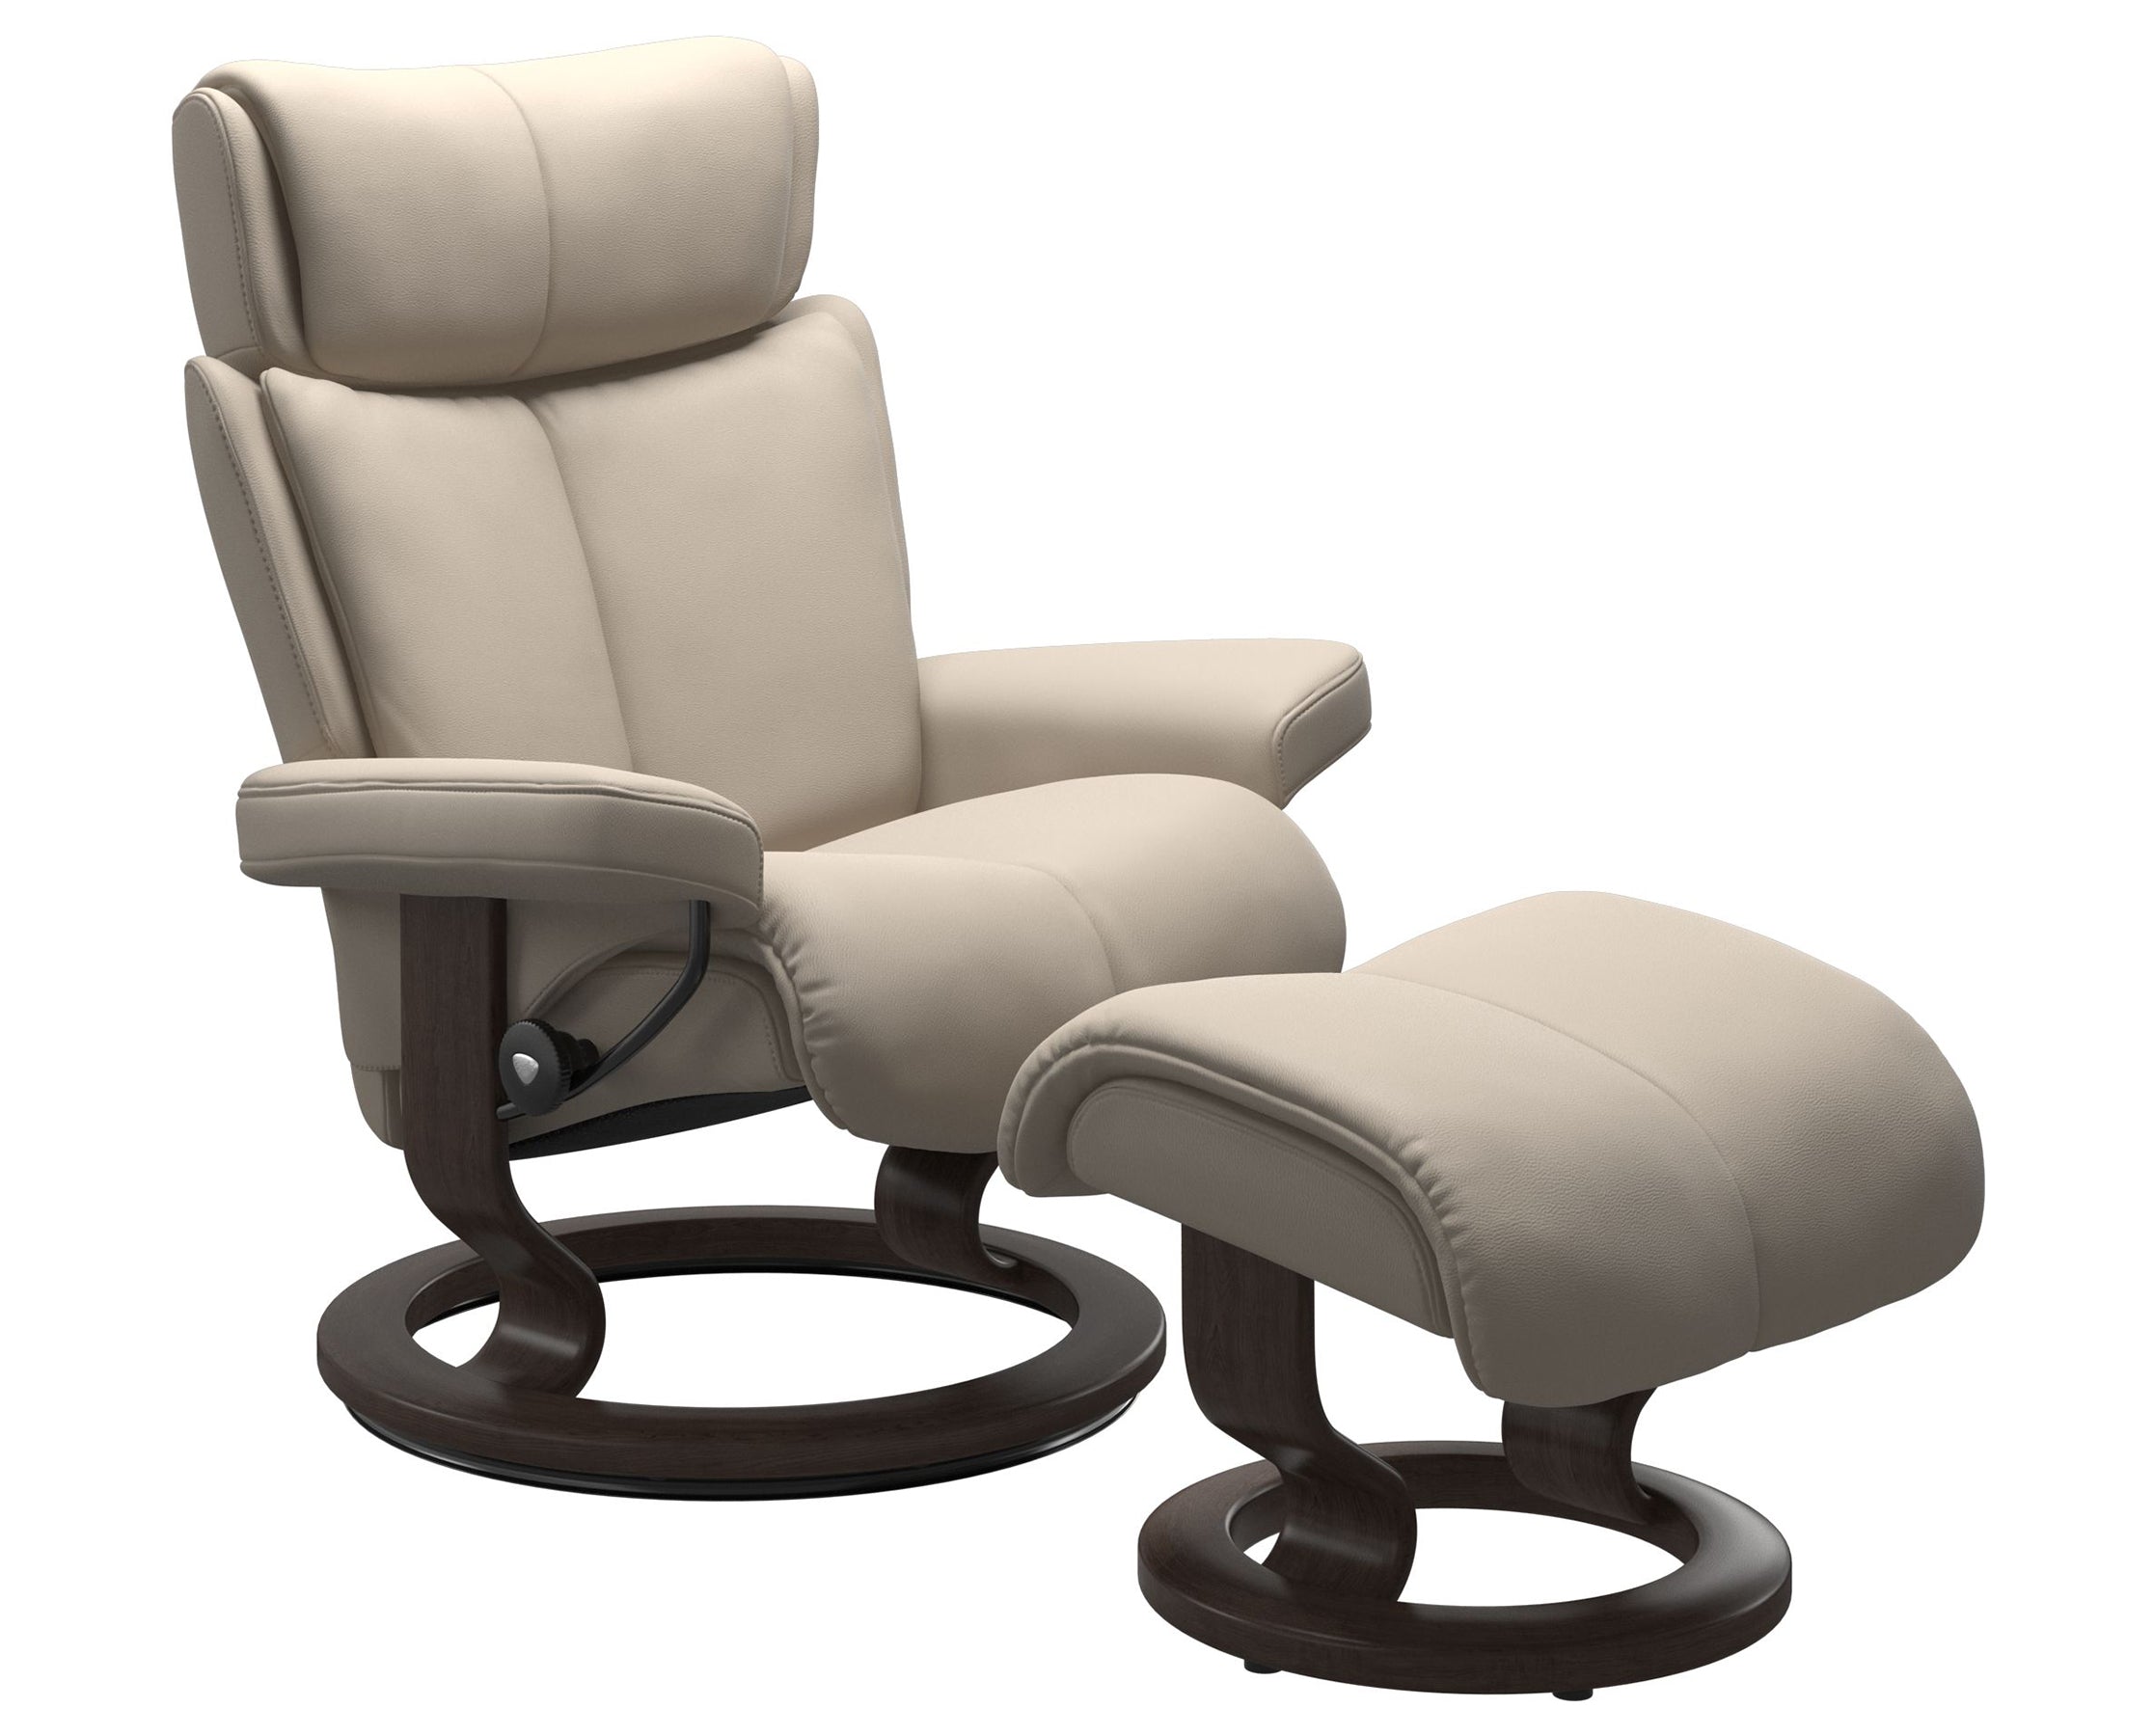 Paloma Leather Fog S/M/L and Wenge Base | Stressless Magic Classic Recliner | Valley Ridge Furniture